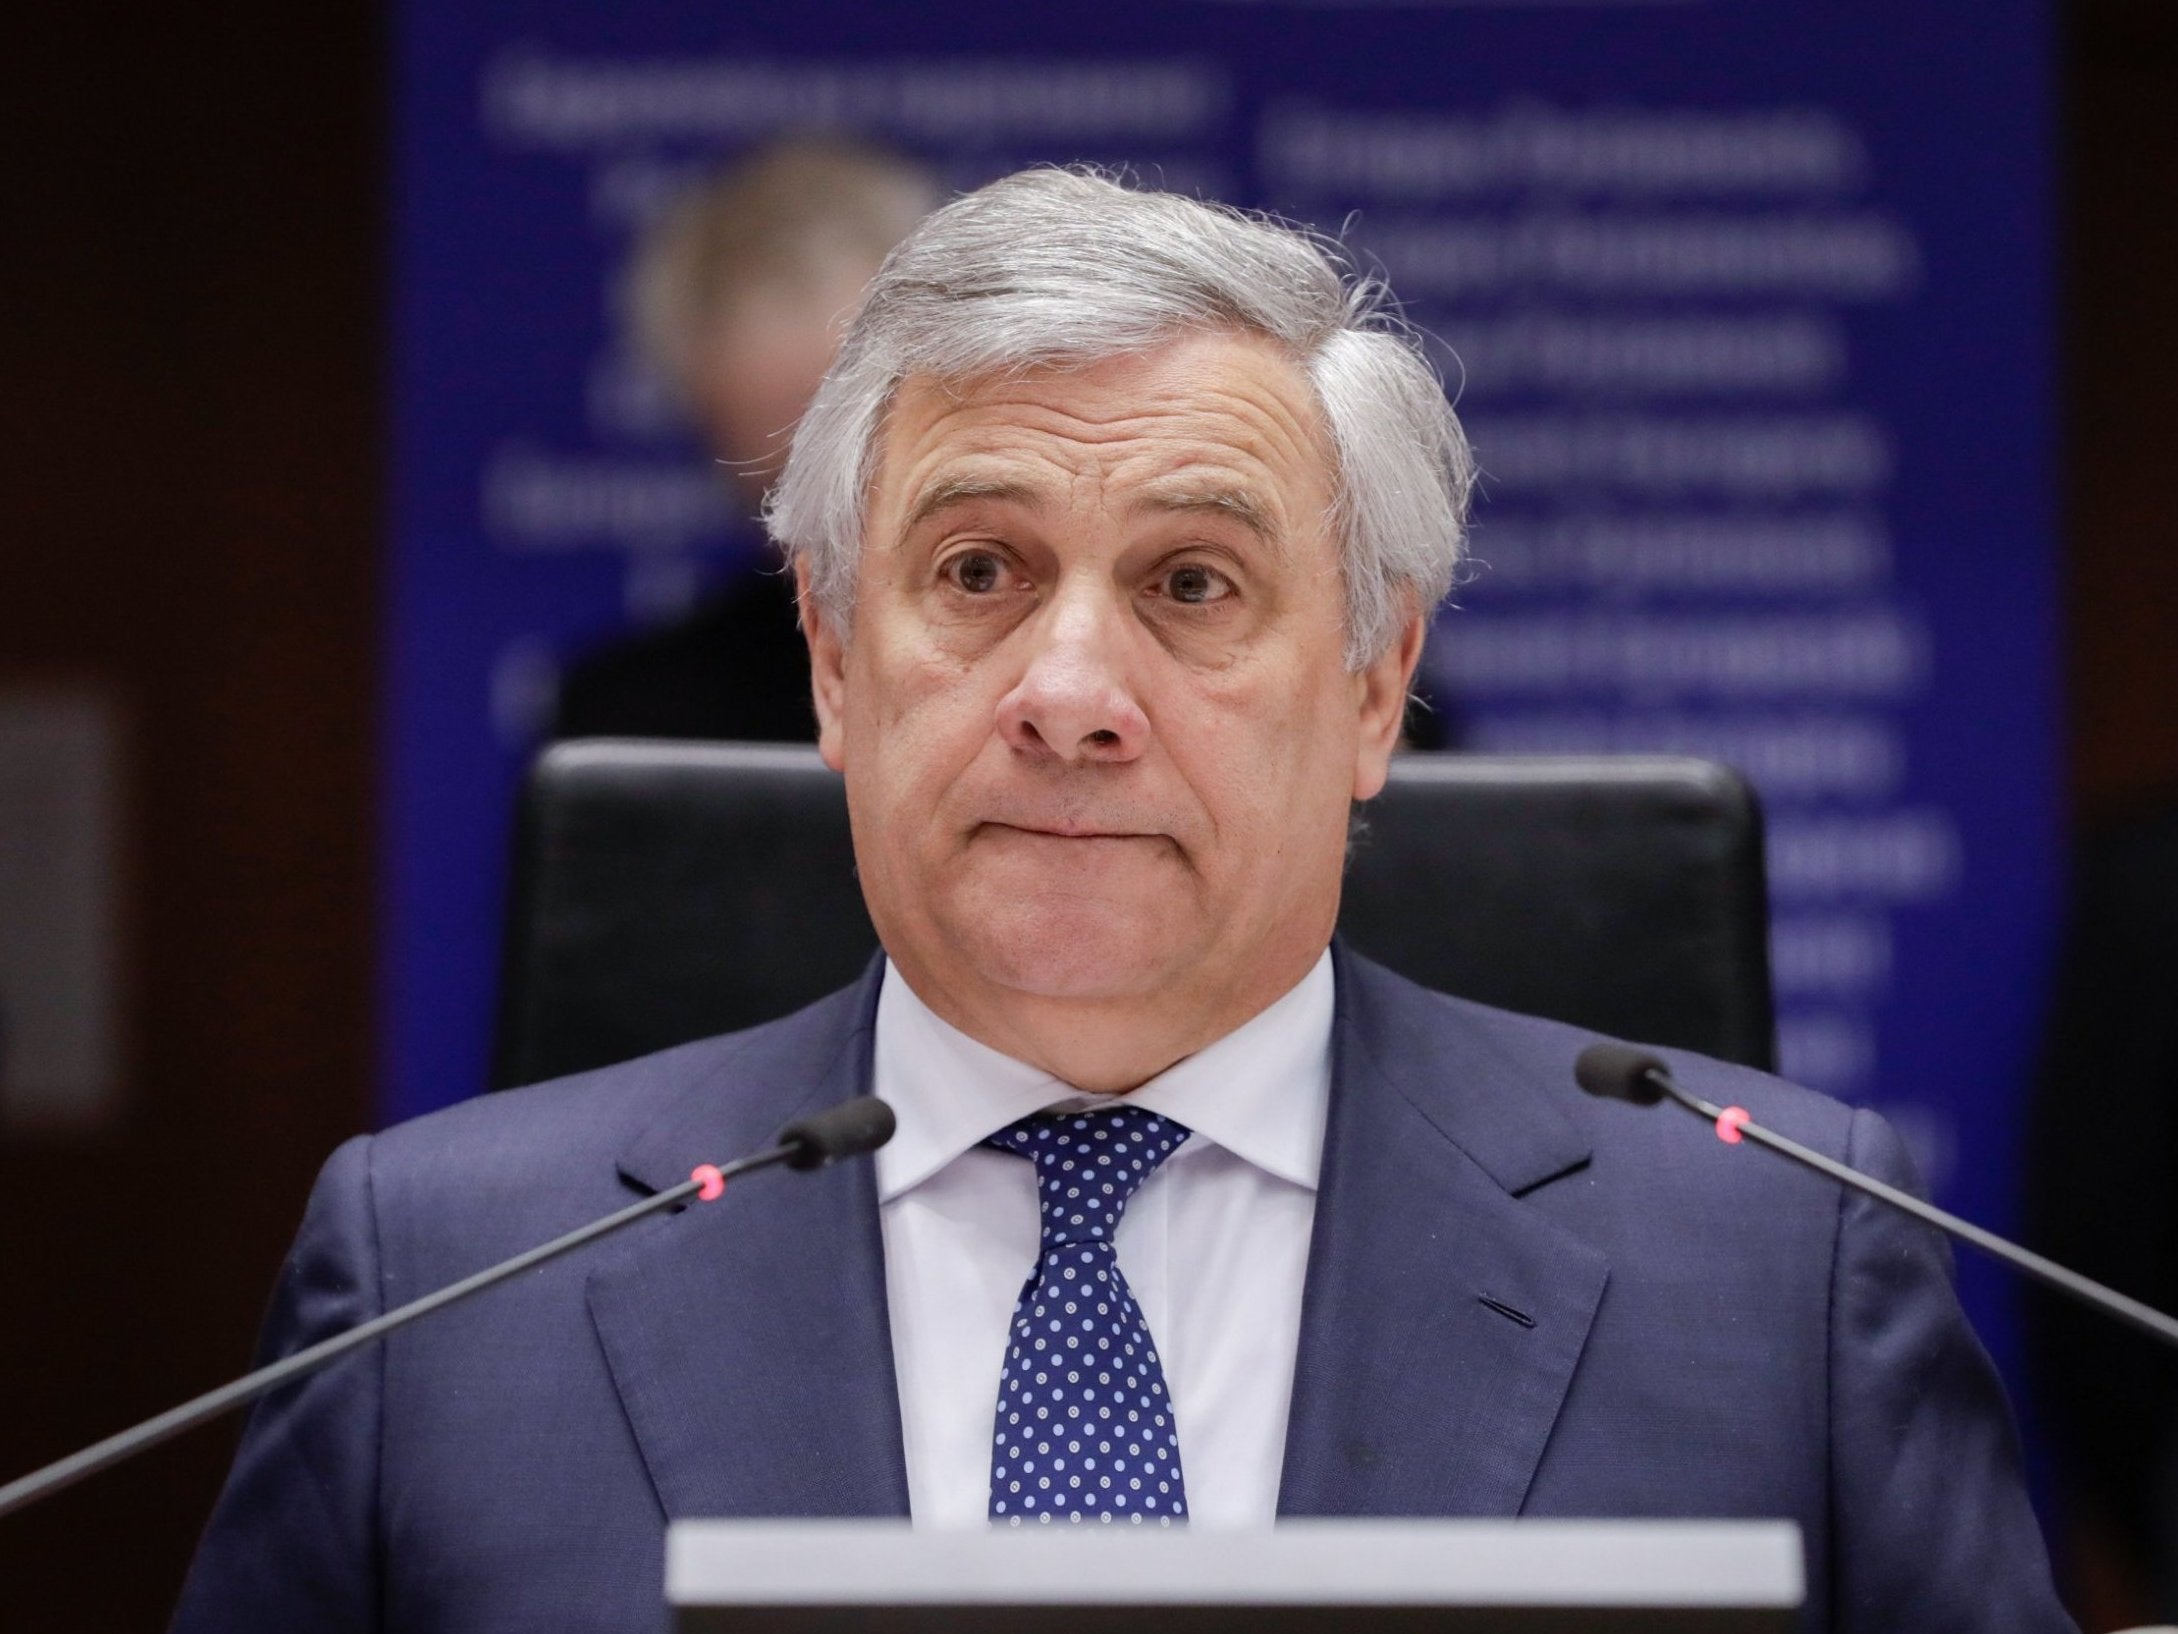 Antonio Tajani has apologised several times for the speech and insists he was misinterpreted